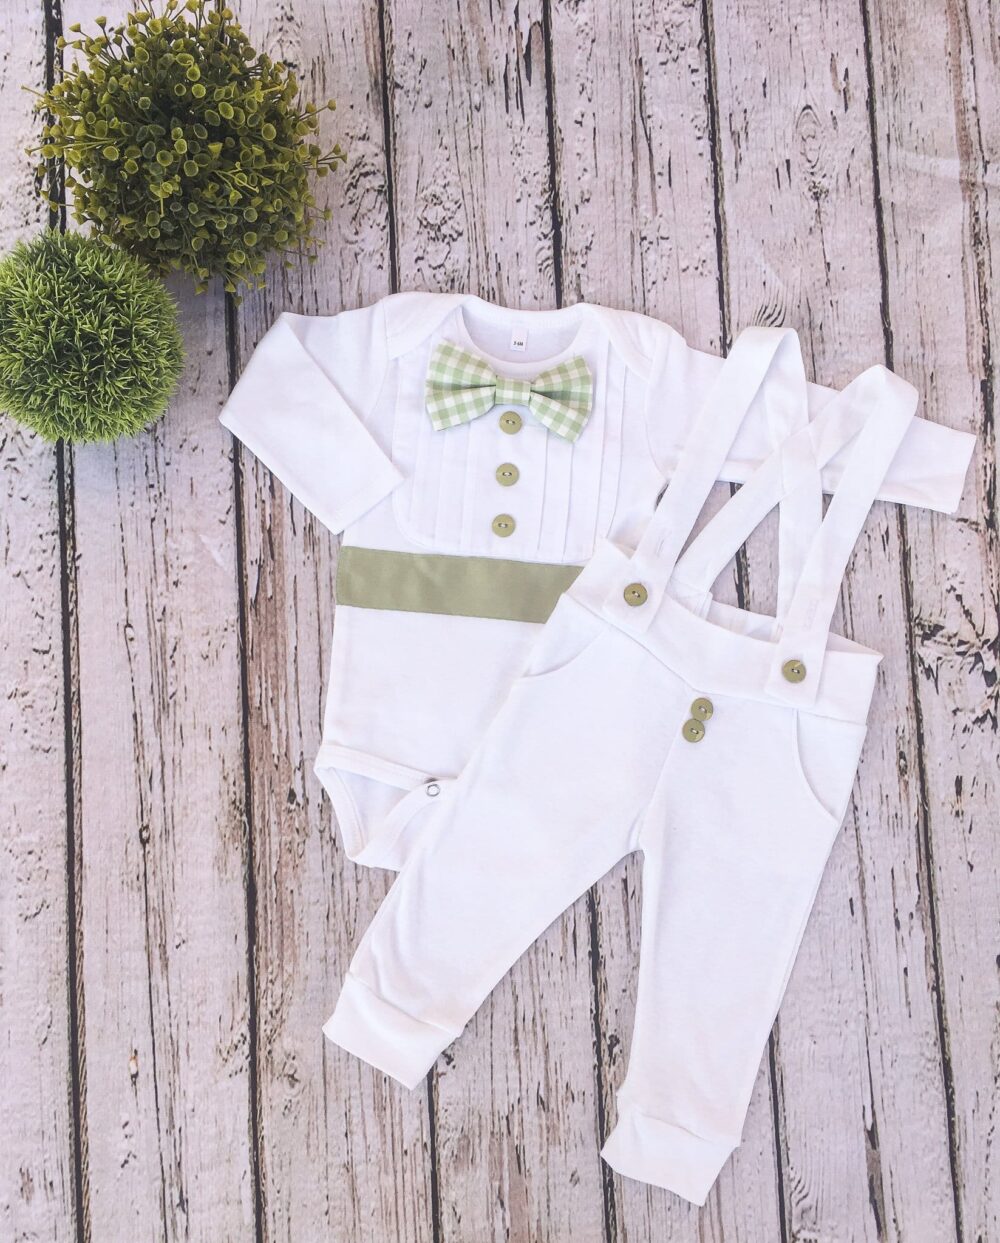 Bebe Couture 2 piece white and sage green christening outfit, with gingham bow tie